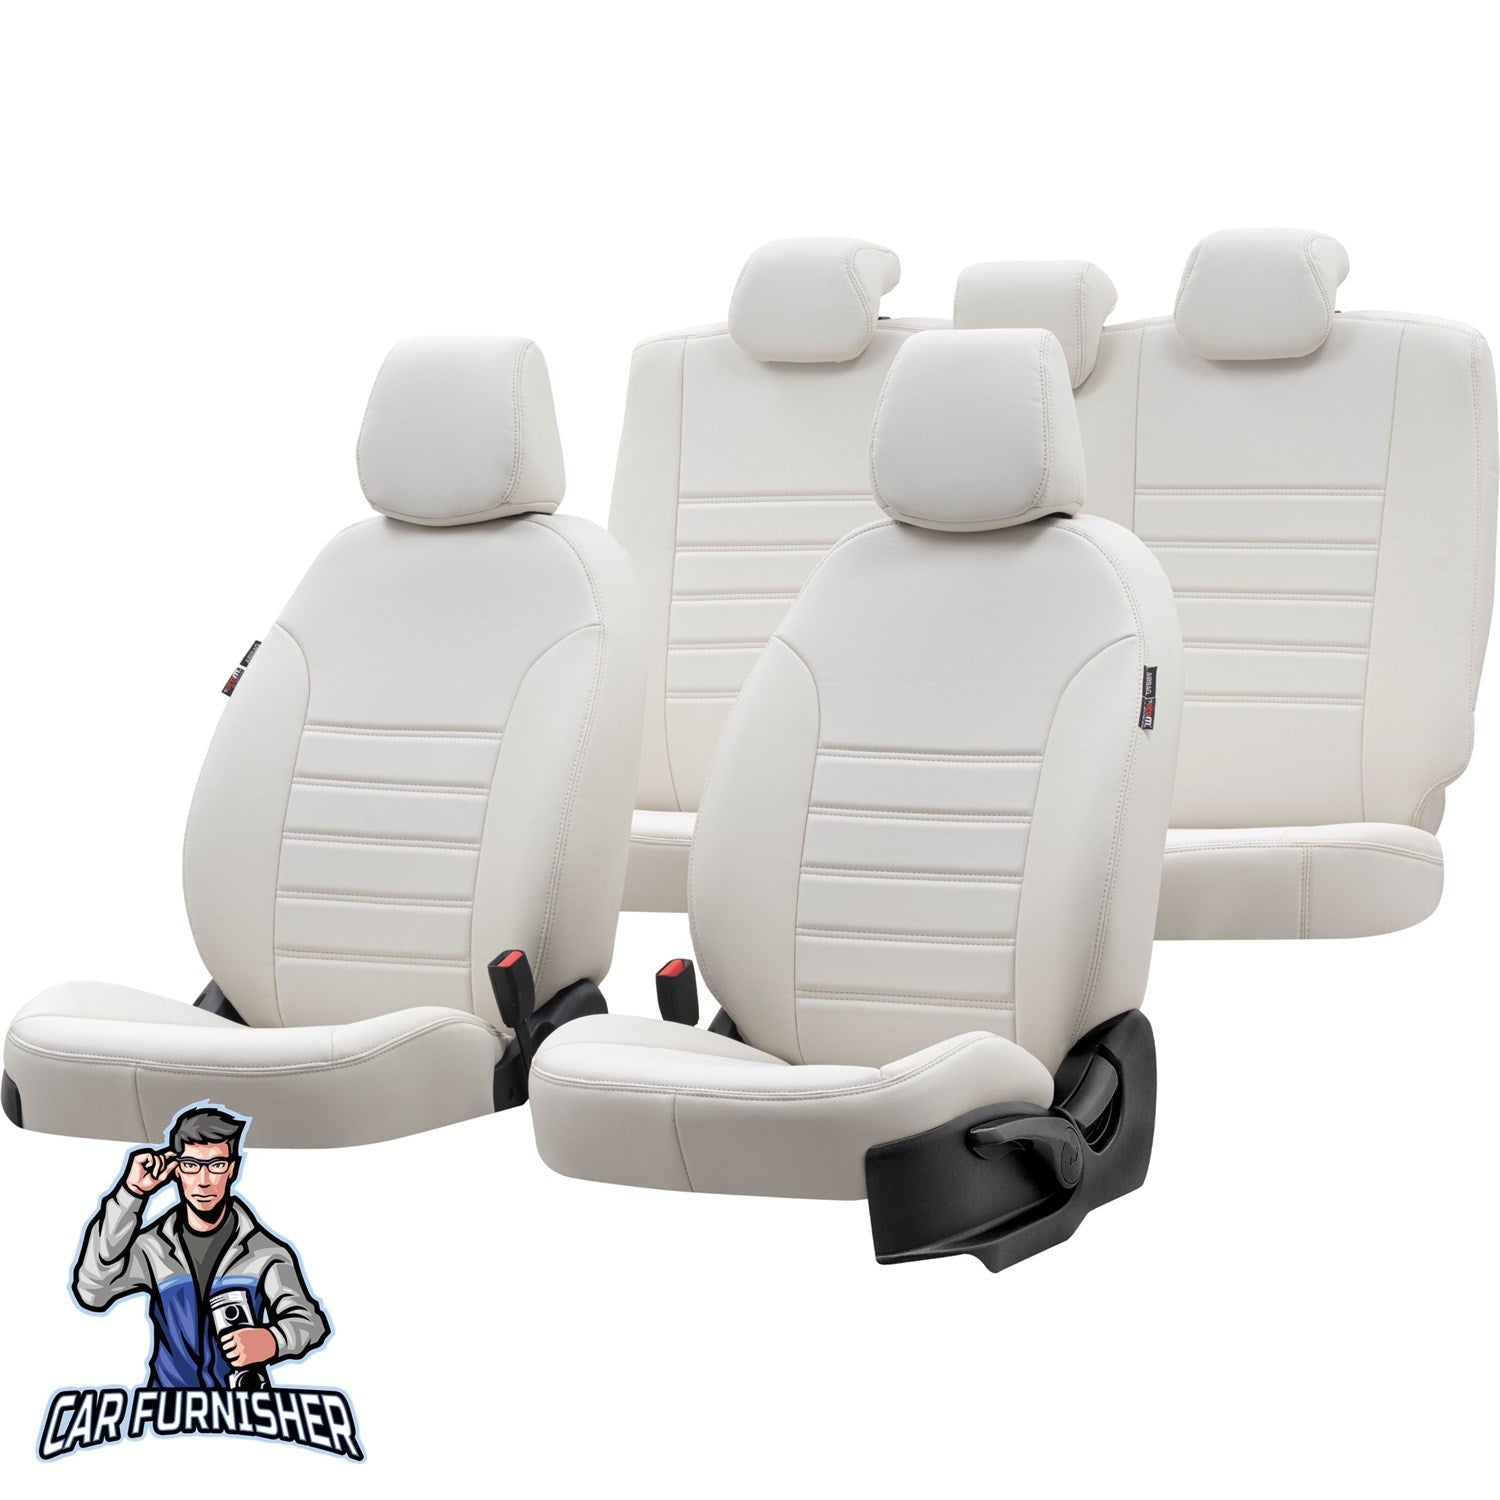 Kia Cerato Seat Covers Istanbul Leather Design Ivory Leather